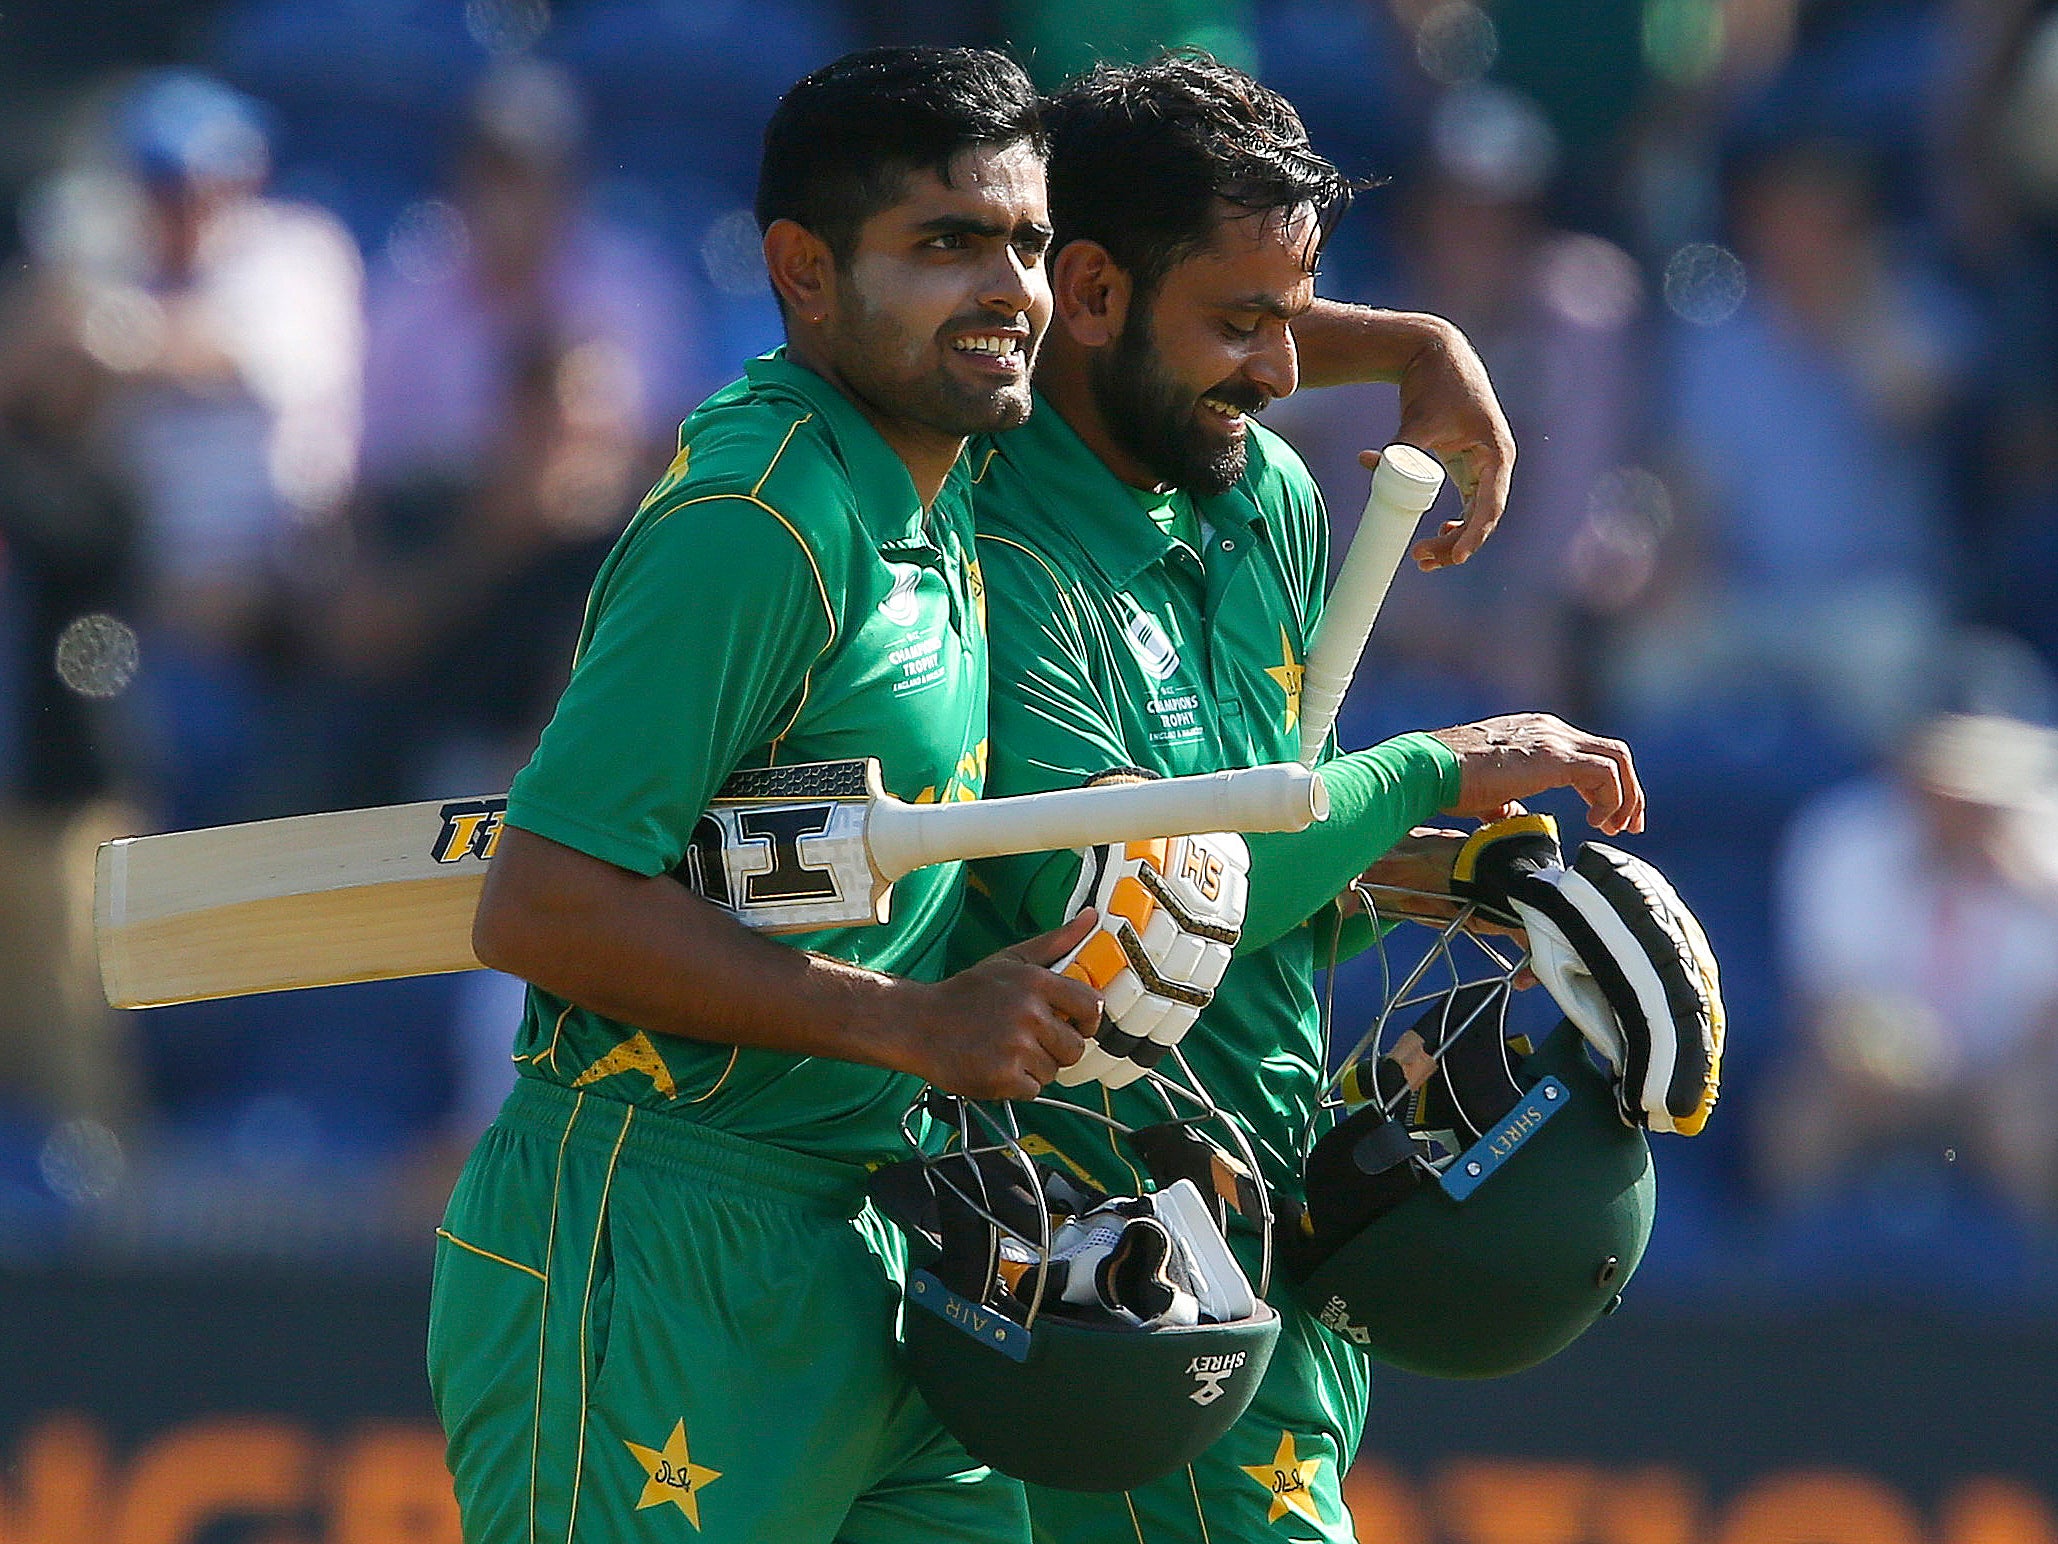 Mohammad Hafeez and Babar Azam celebrate a job well done for Pakistan